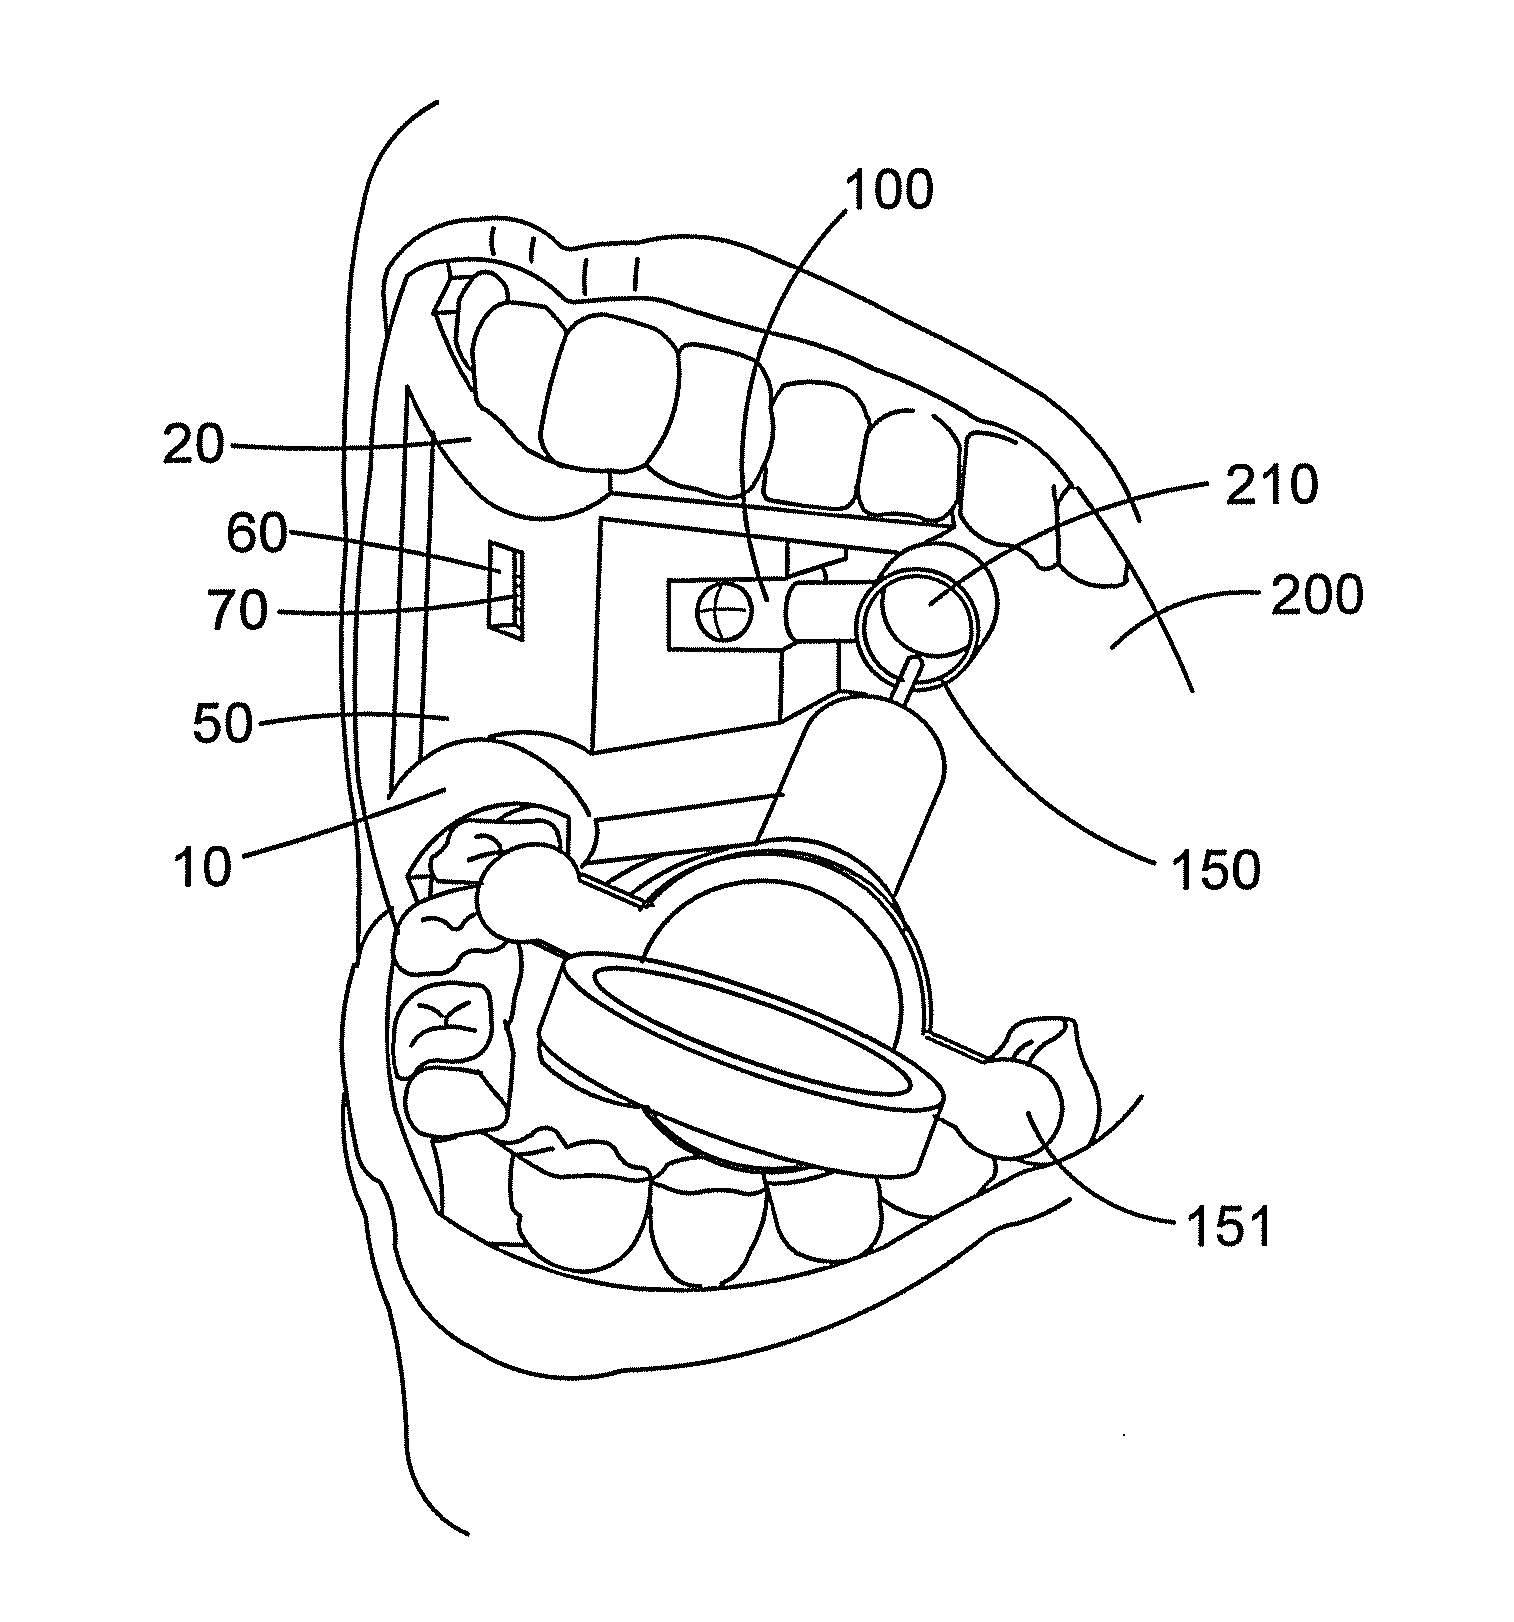 Device for selective targeting of a substance to a body part